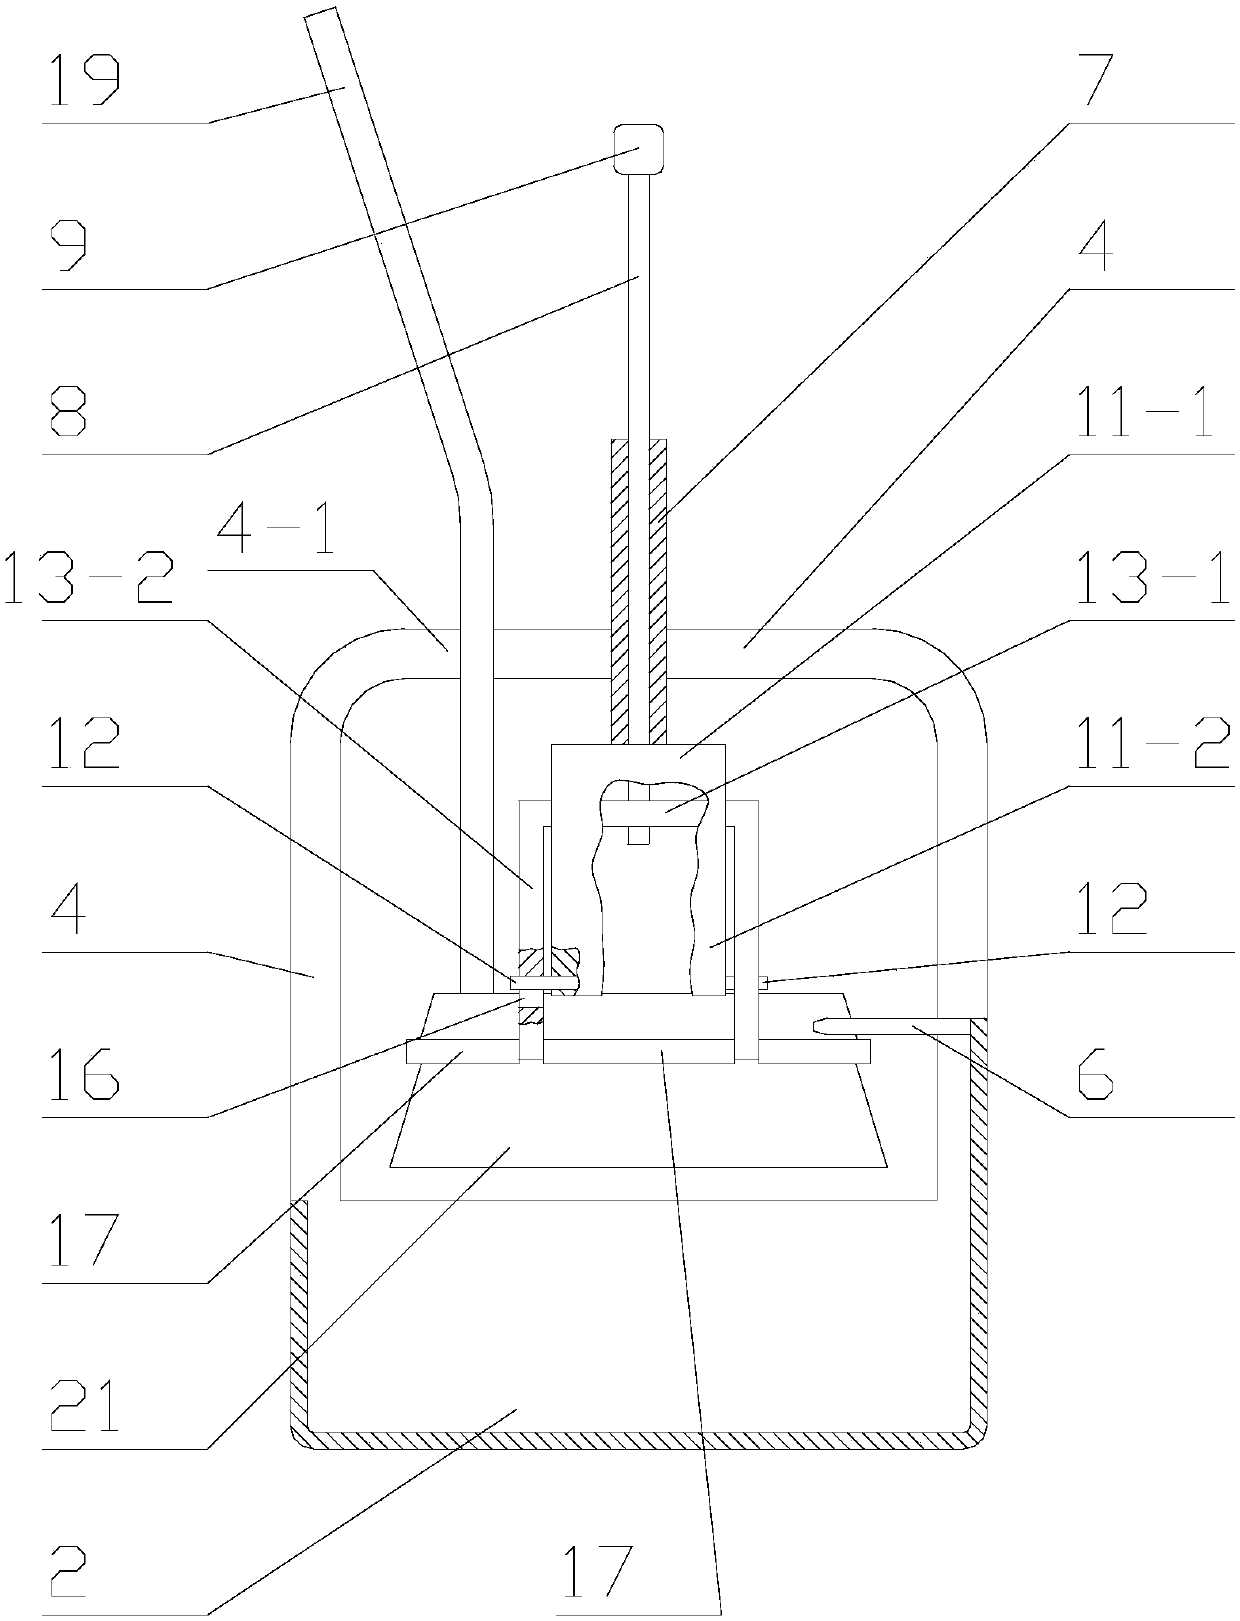 Water squeezing structure and cleaning tool